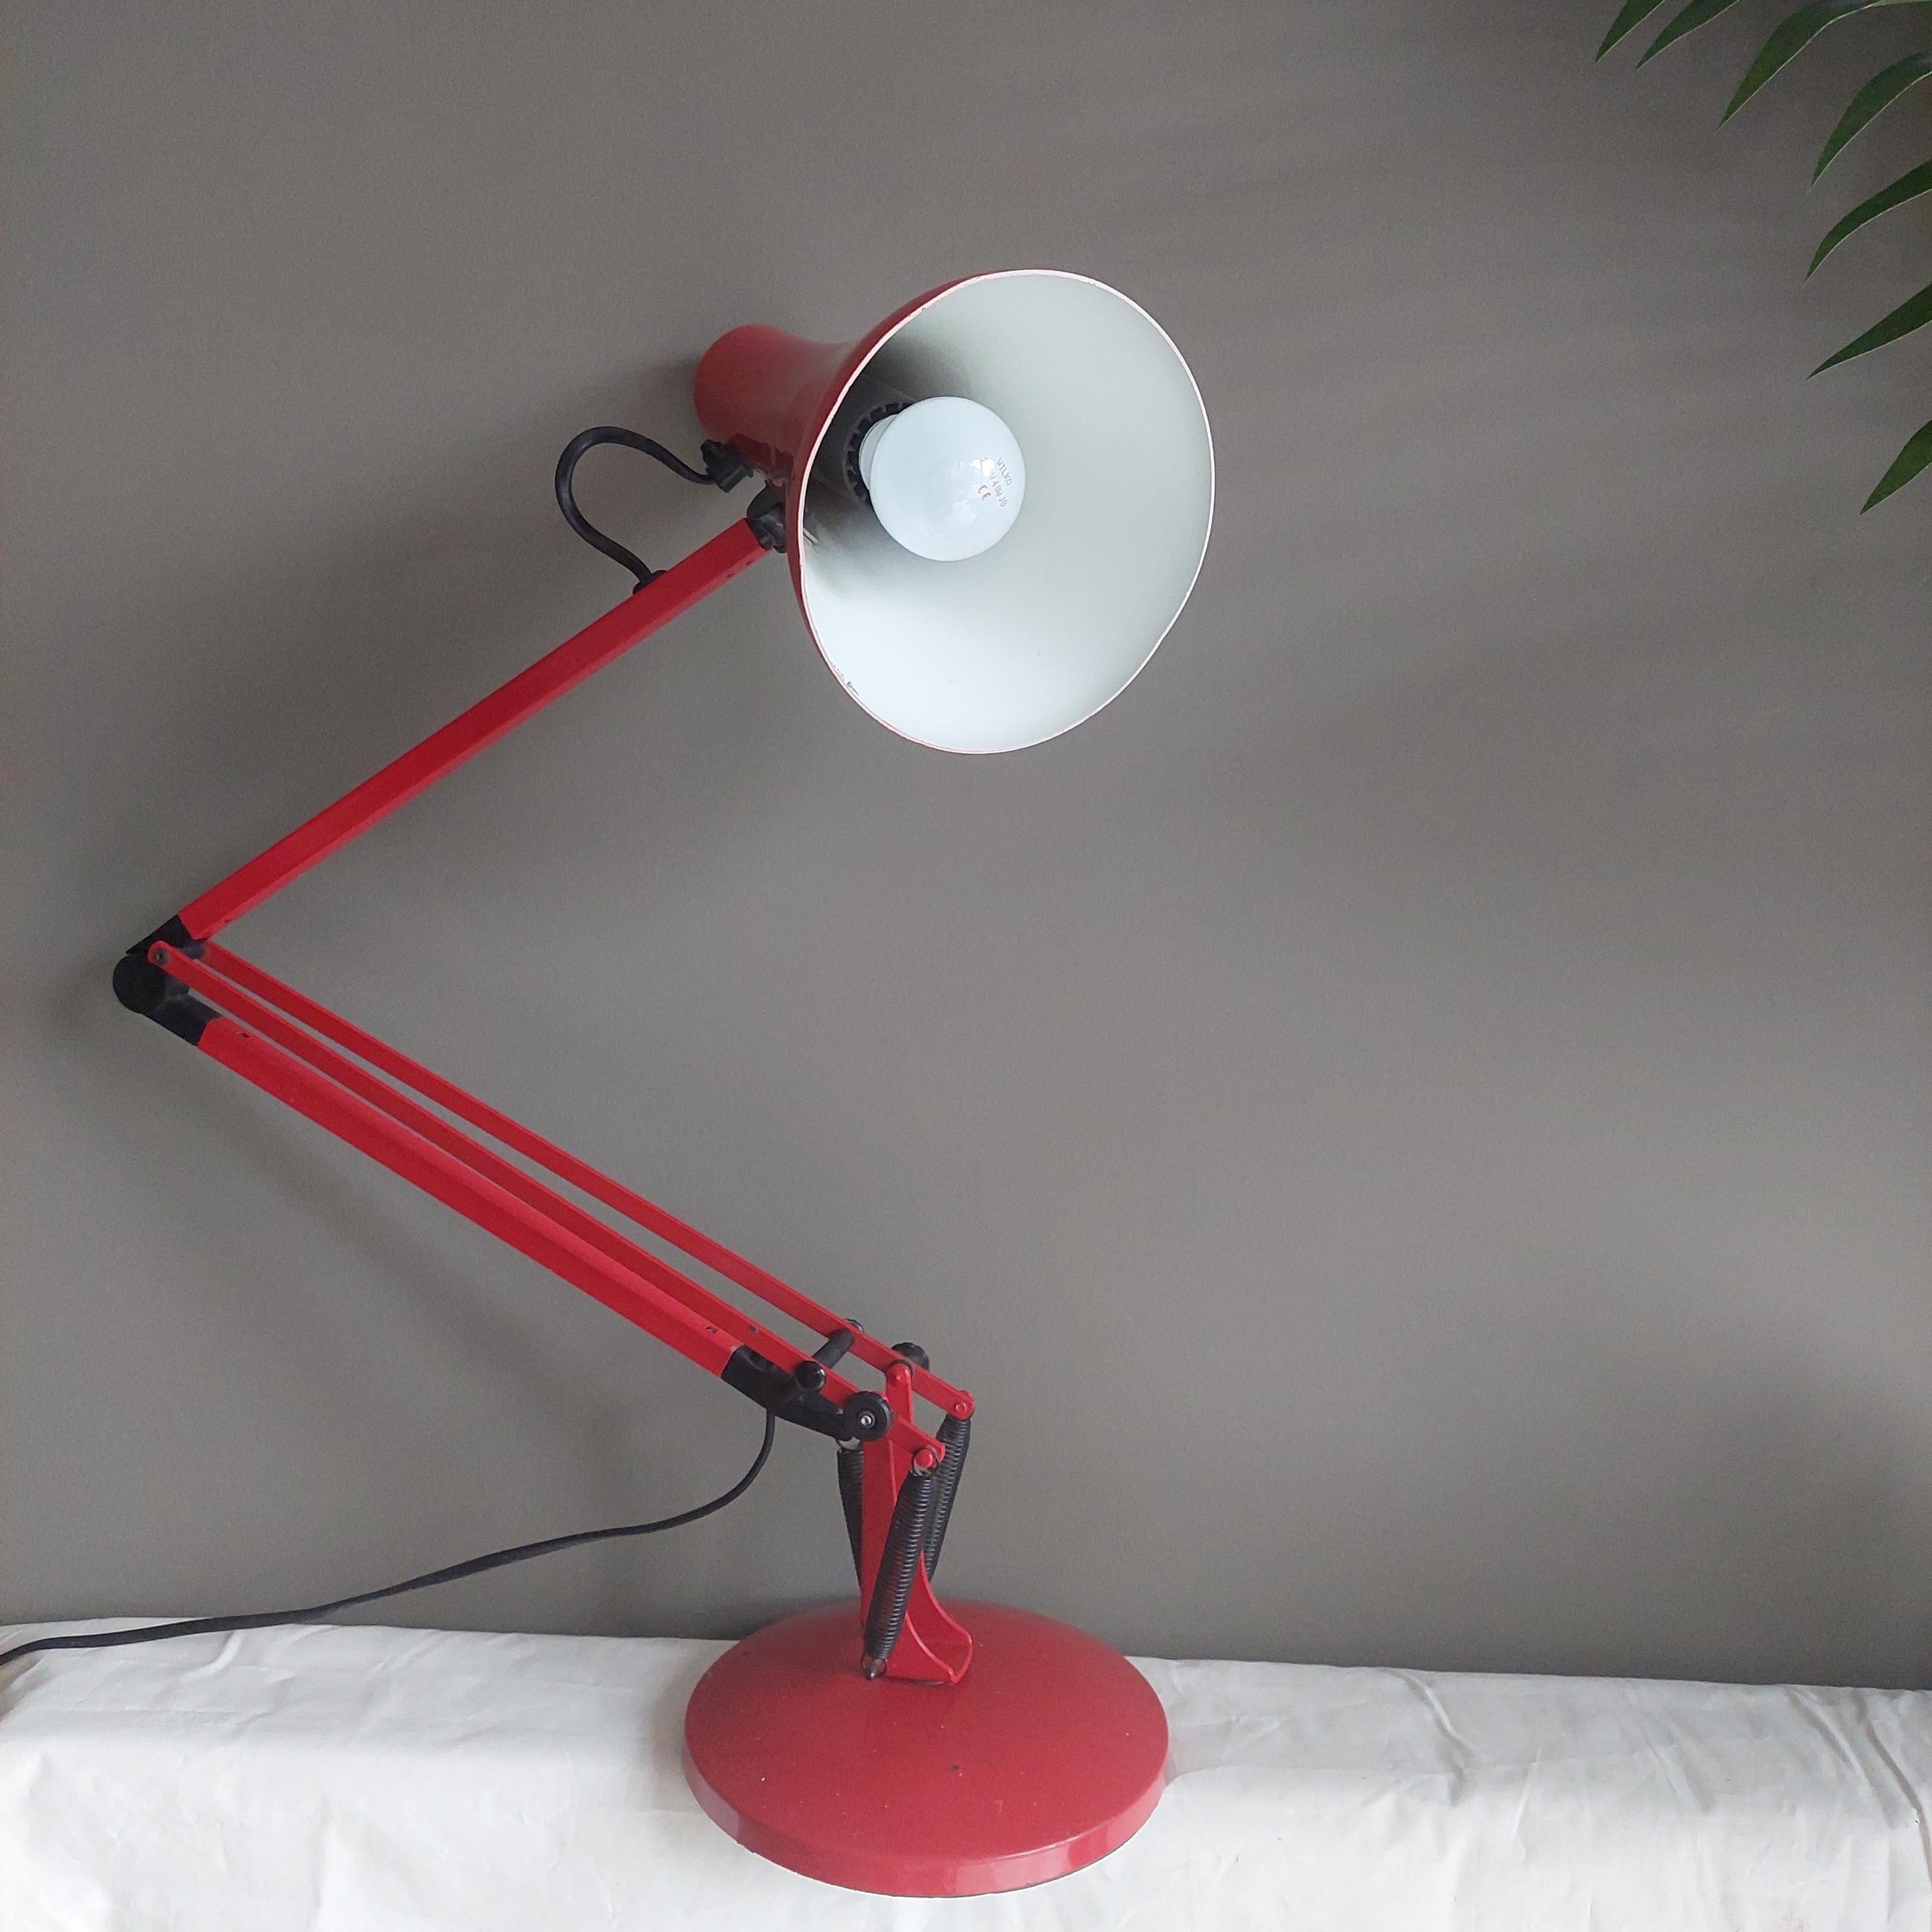 Rare, vintage 1980s Anglepoise Model 90 desk lamp by Herbert Terry. 
It has a wonderful patina showing its age and history. 

All the contrasting black springs work perfectly allowing the lamps to be articulated into any position and so showing off